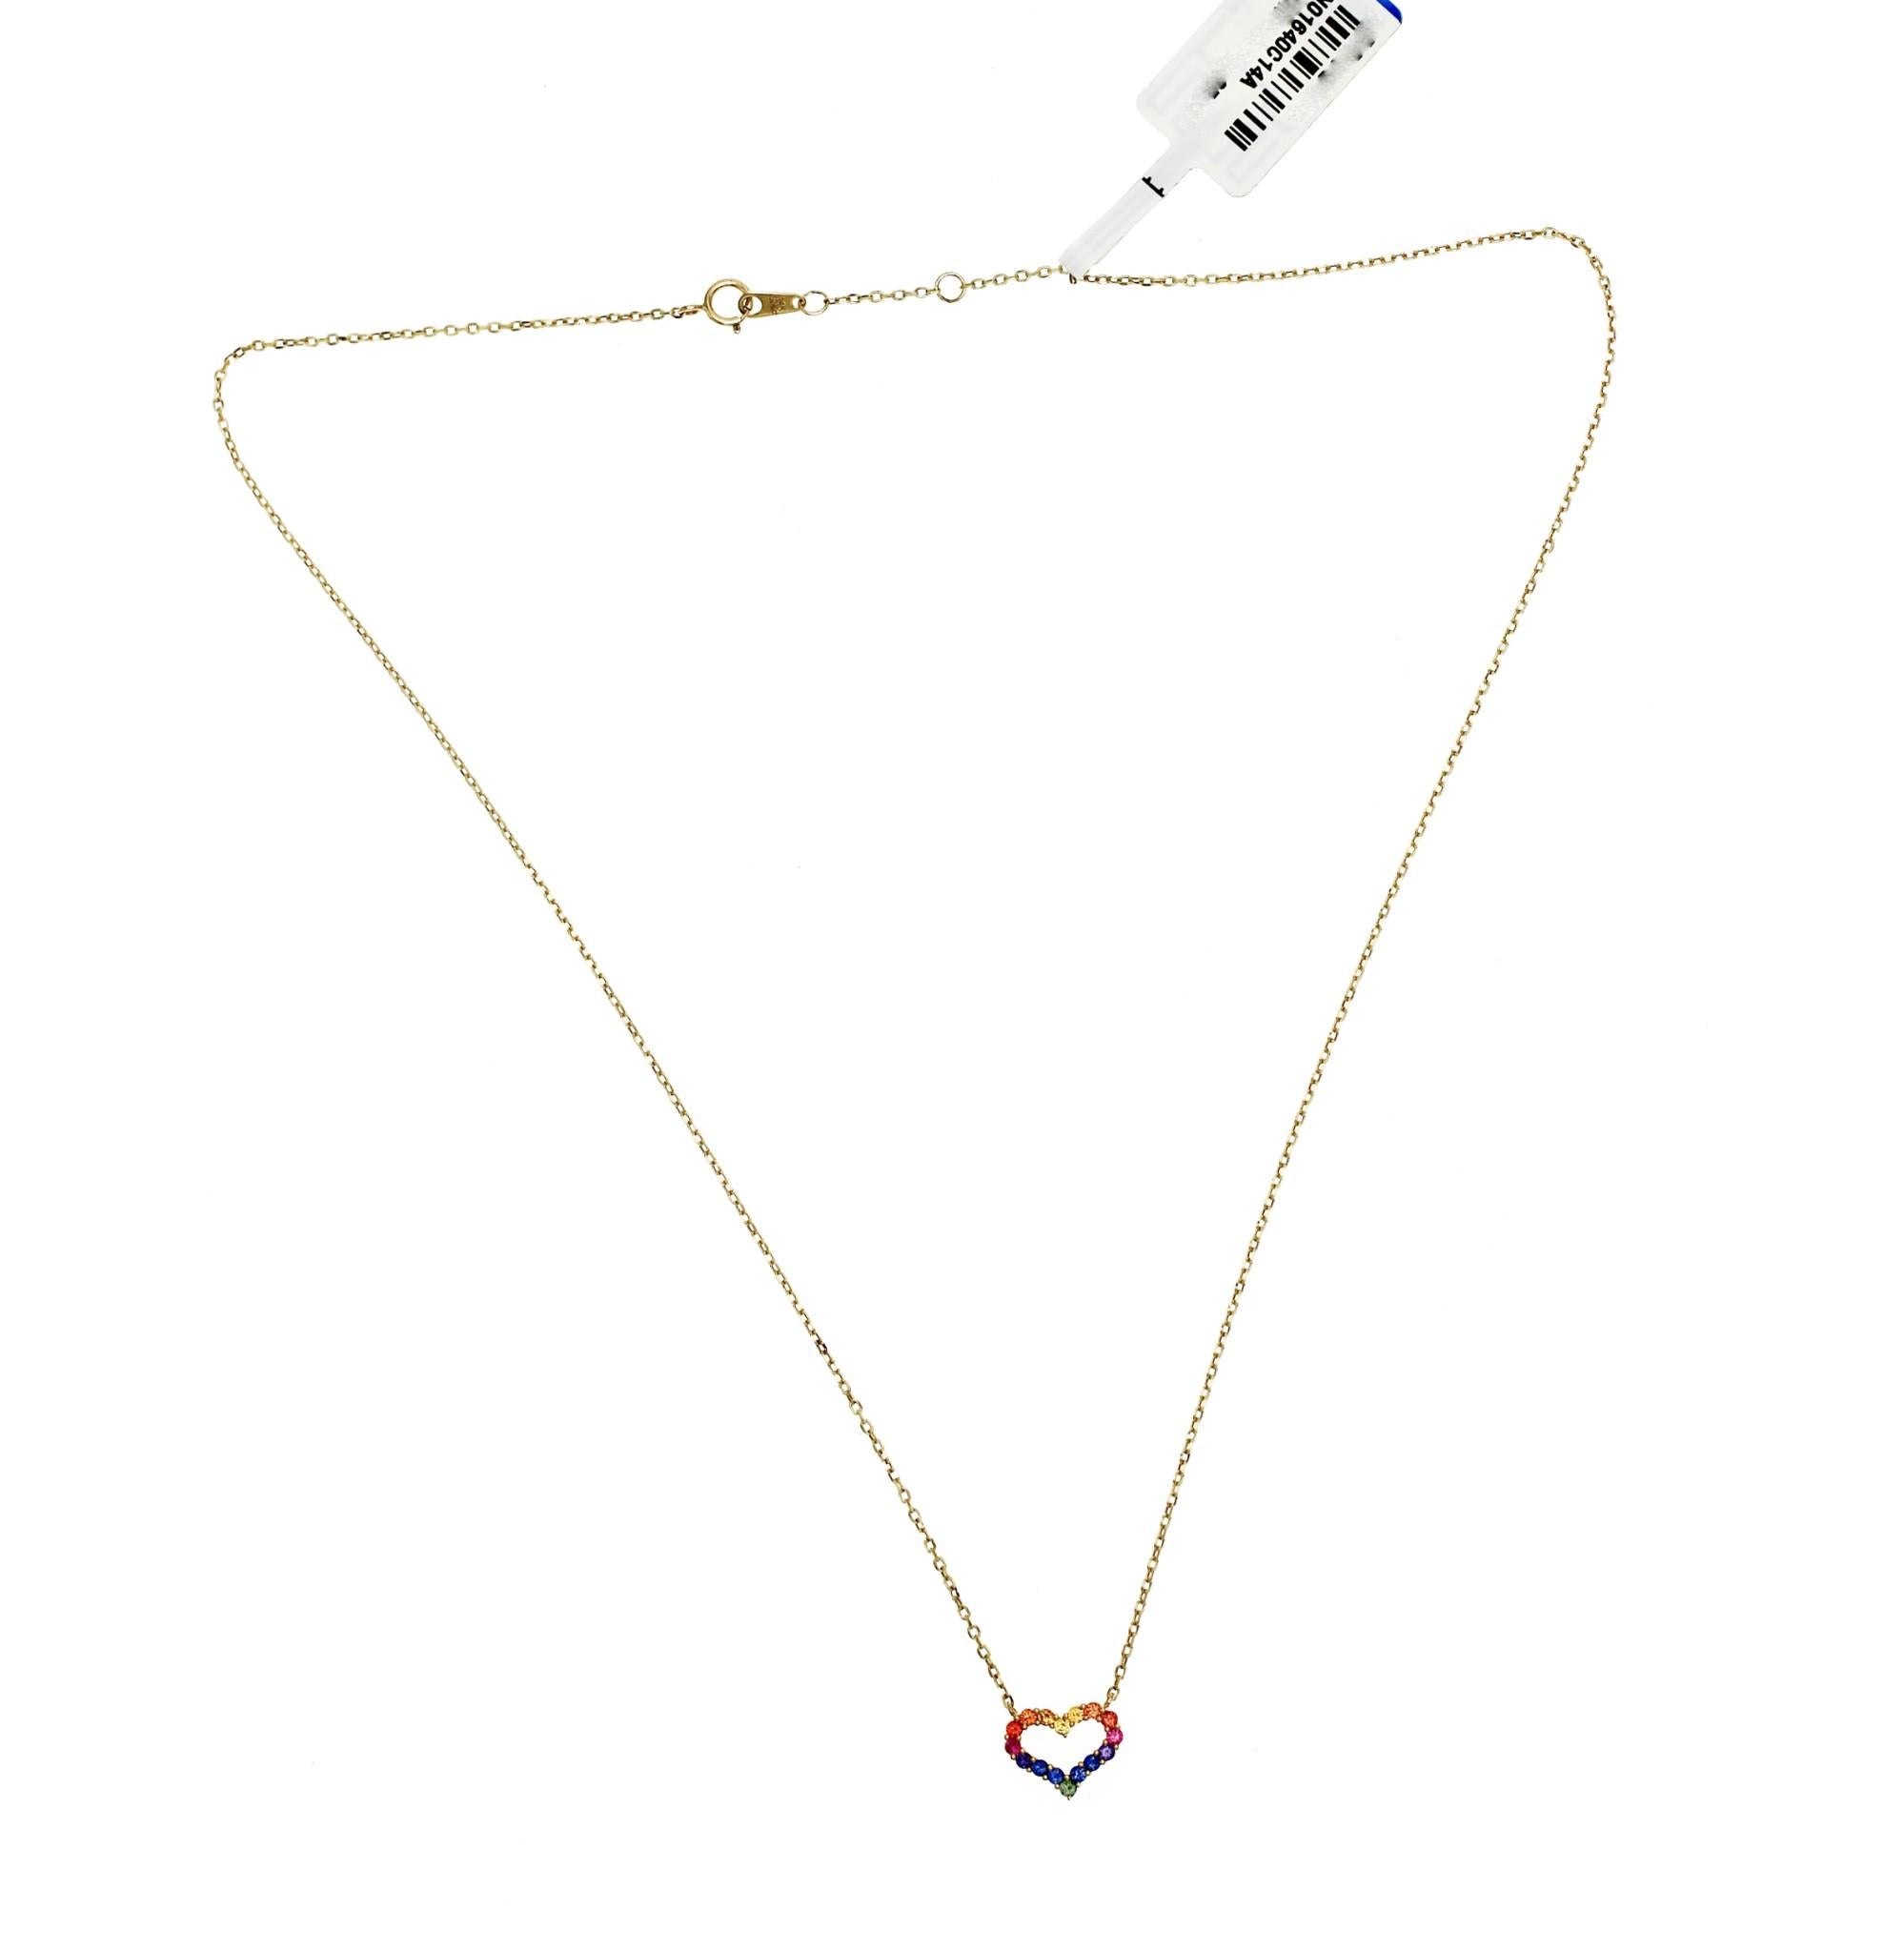 100% Authentic, 100% Customer Satisfaction

Pendant: 10 mm

Chain: 1 mm

Size: 16-18 Inches

Metal: 14K Yellow  Gold

Hallmarks: 14K

Total Weight: 1.37 Grams

Stone Type: 0.40 CT Natural Multi Sapphire

Condition: New With Tag 